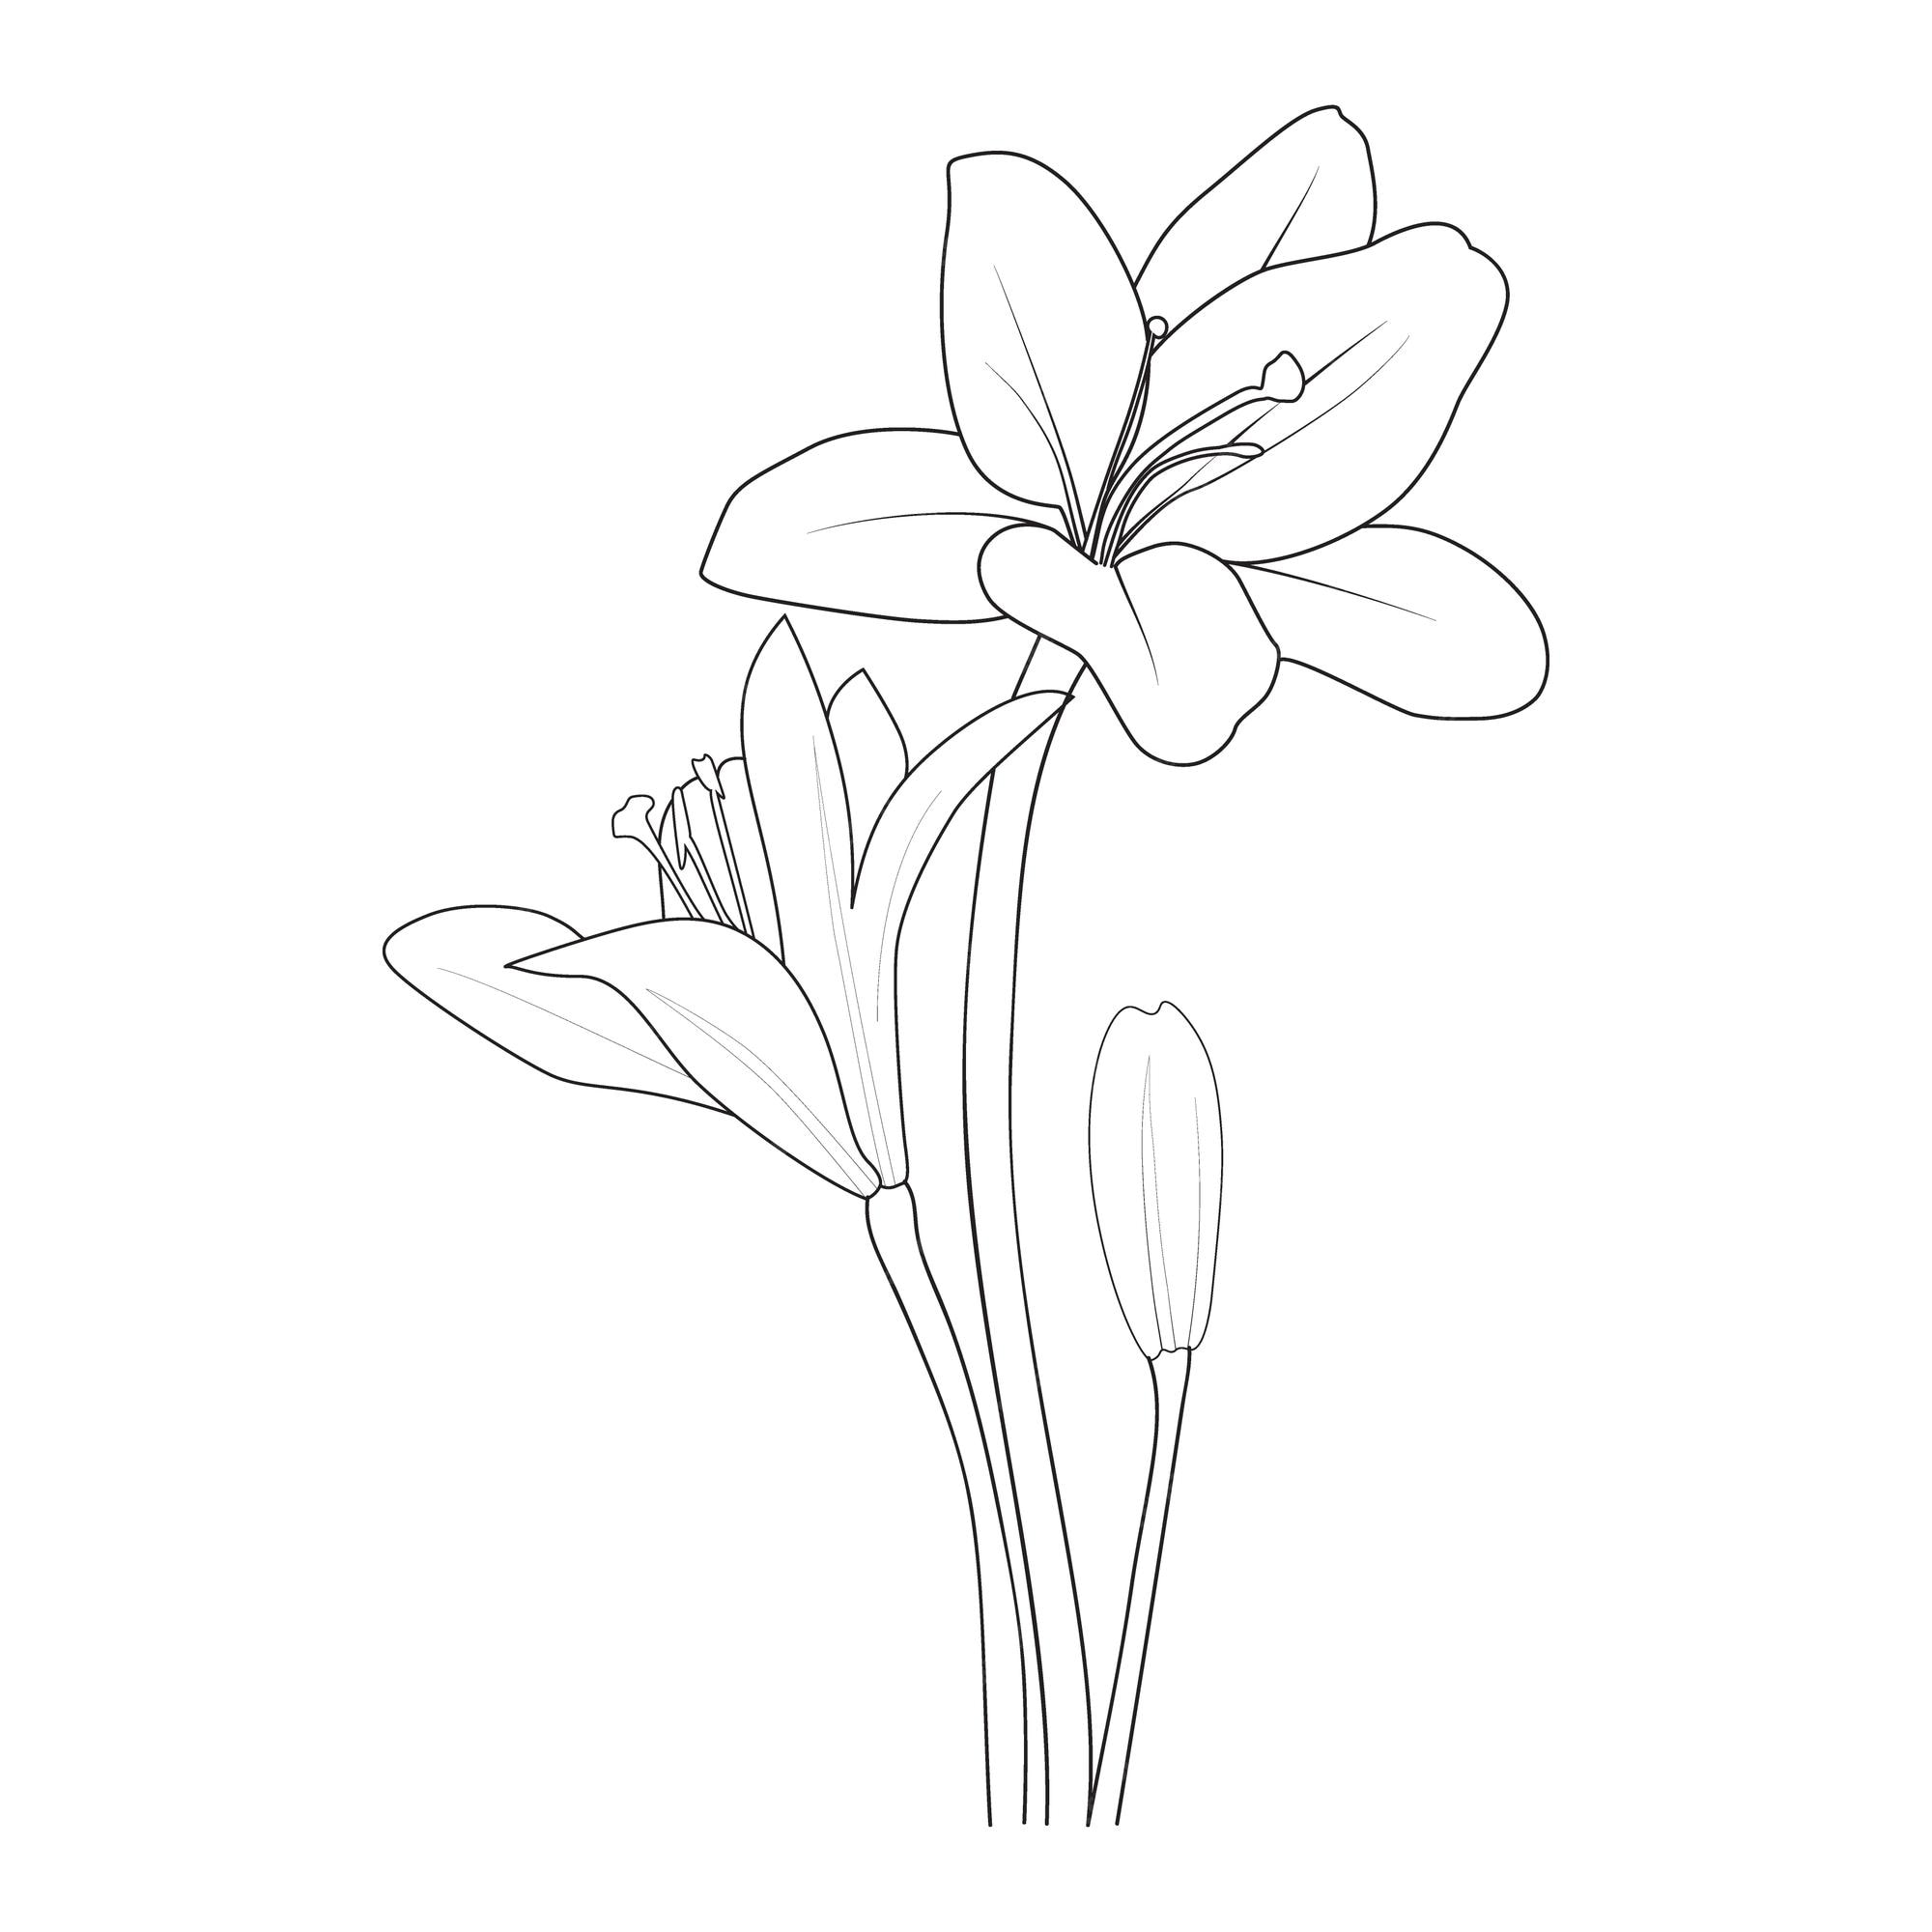 Premium vector sketch of hand drawn lily flower coloring page and book vector illustration summer collection